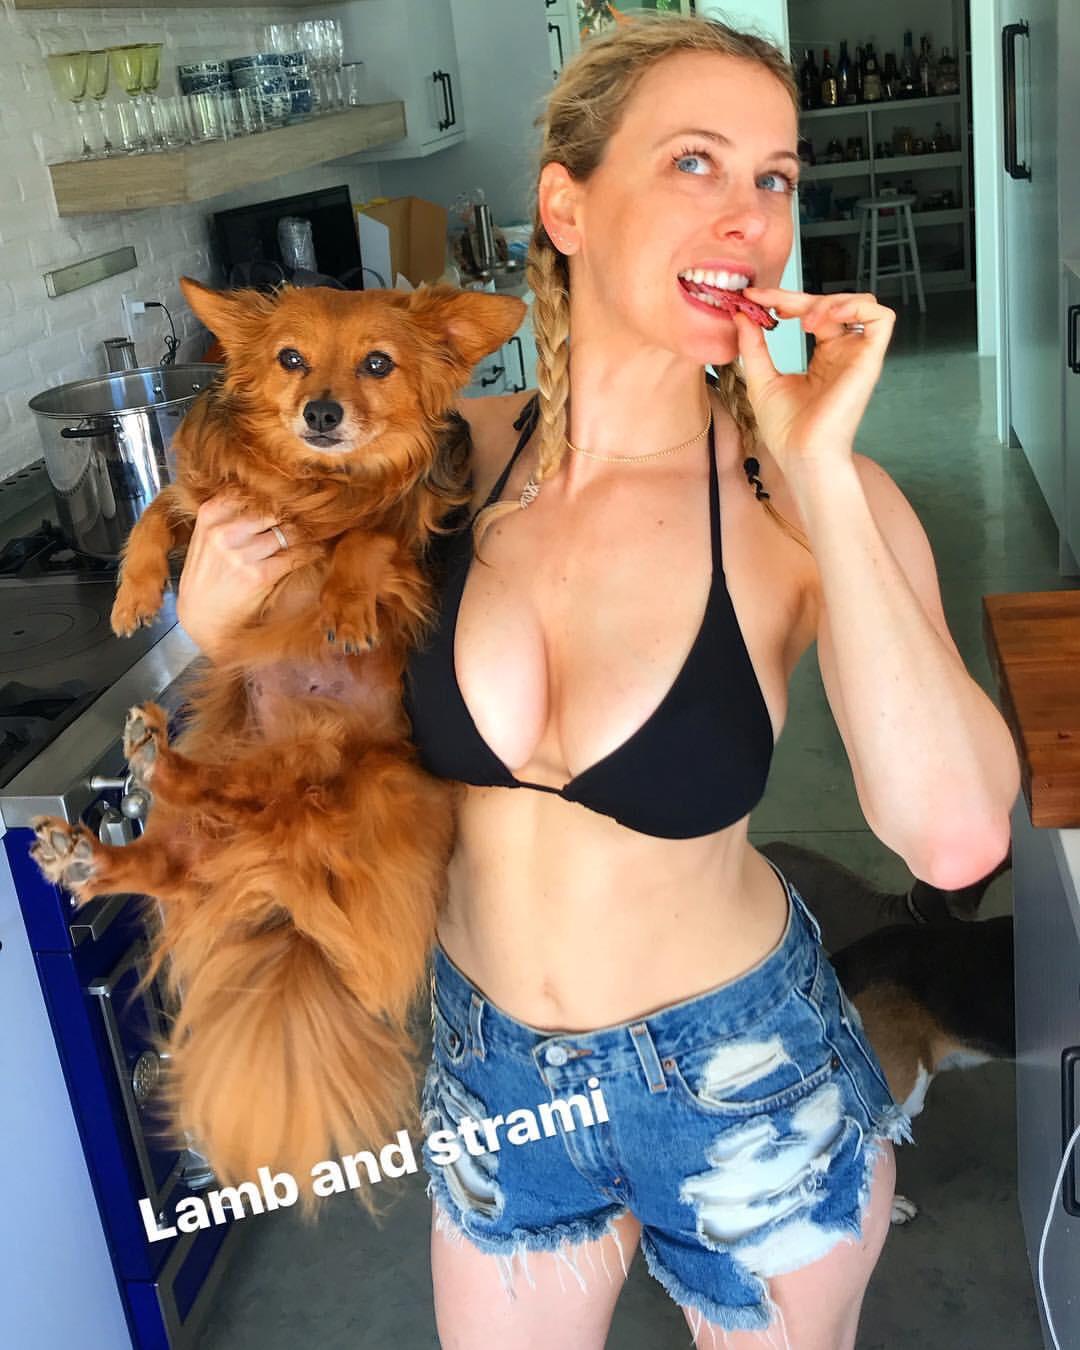 Iliza Shlesinger - posted in the Celebs community